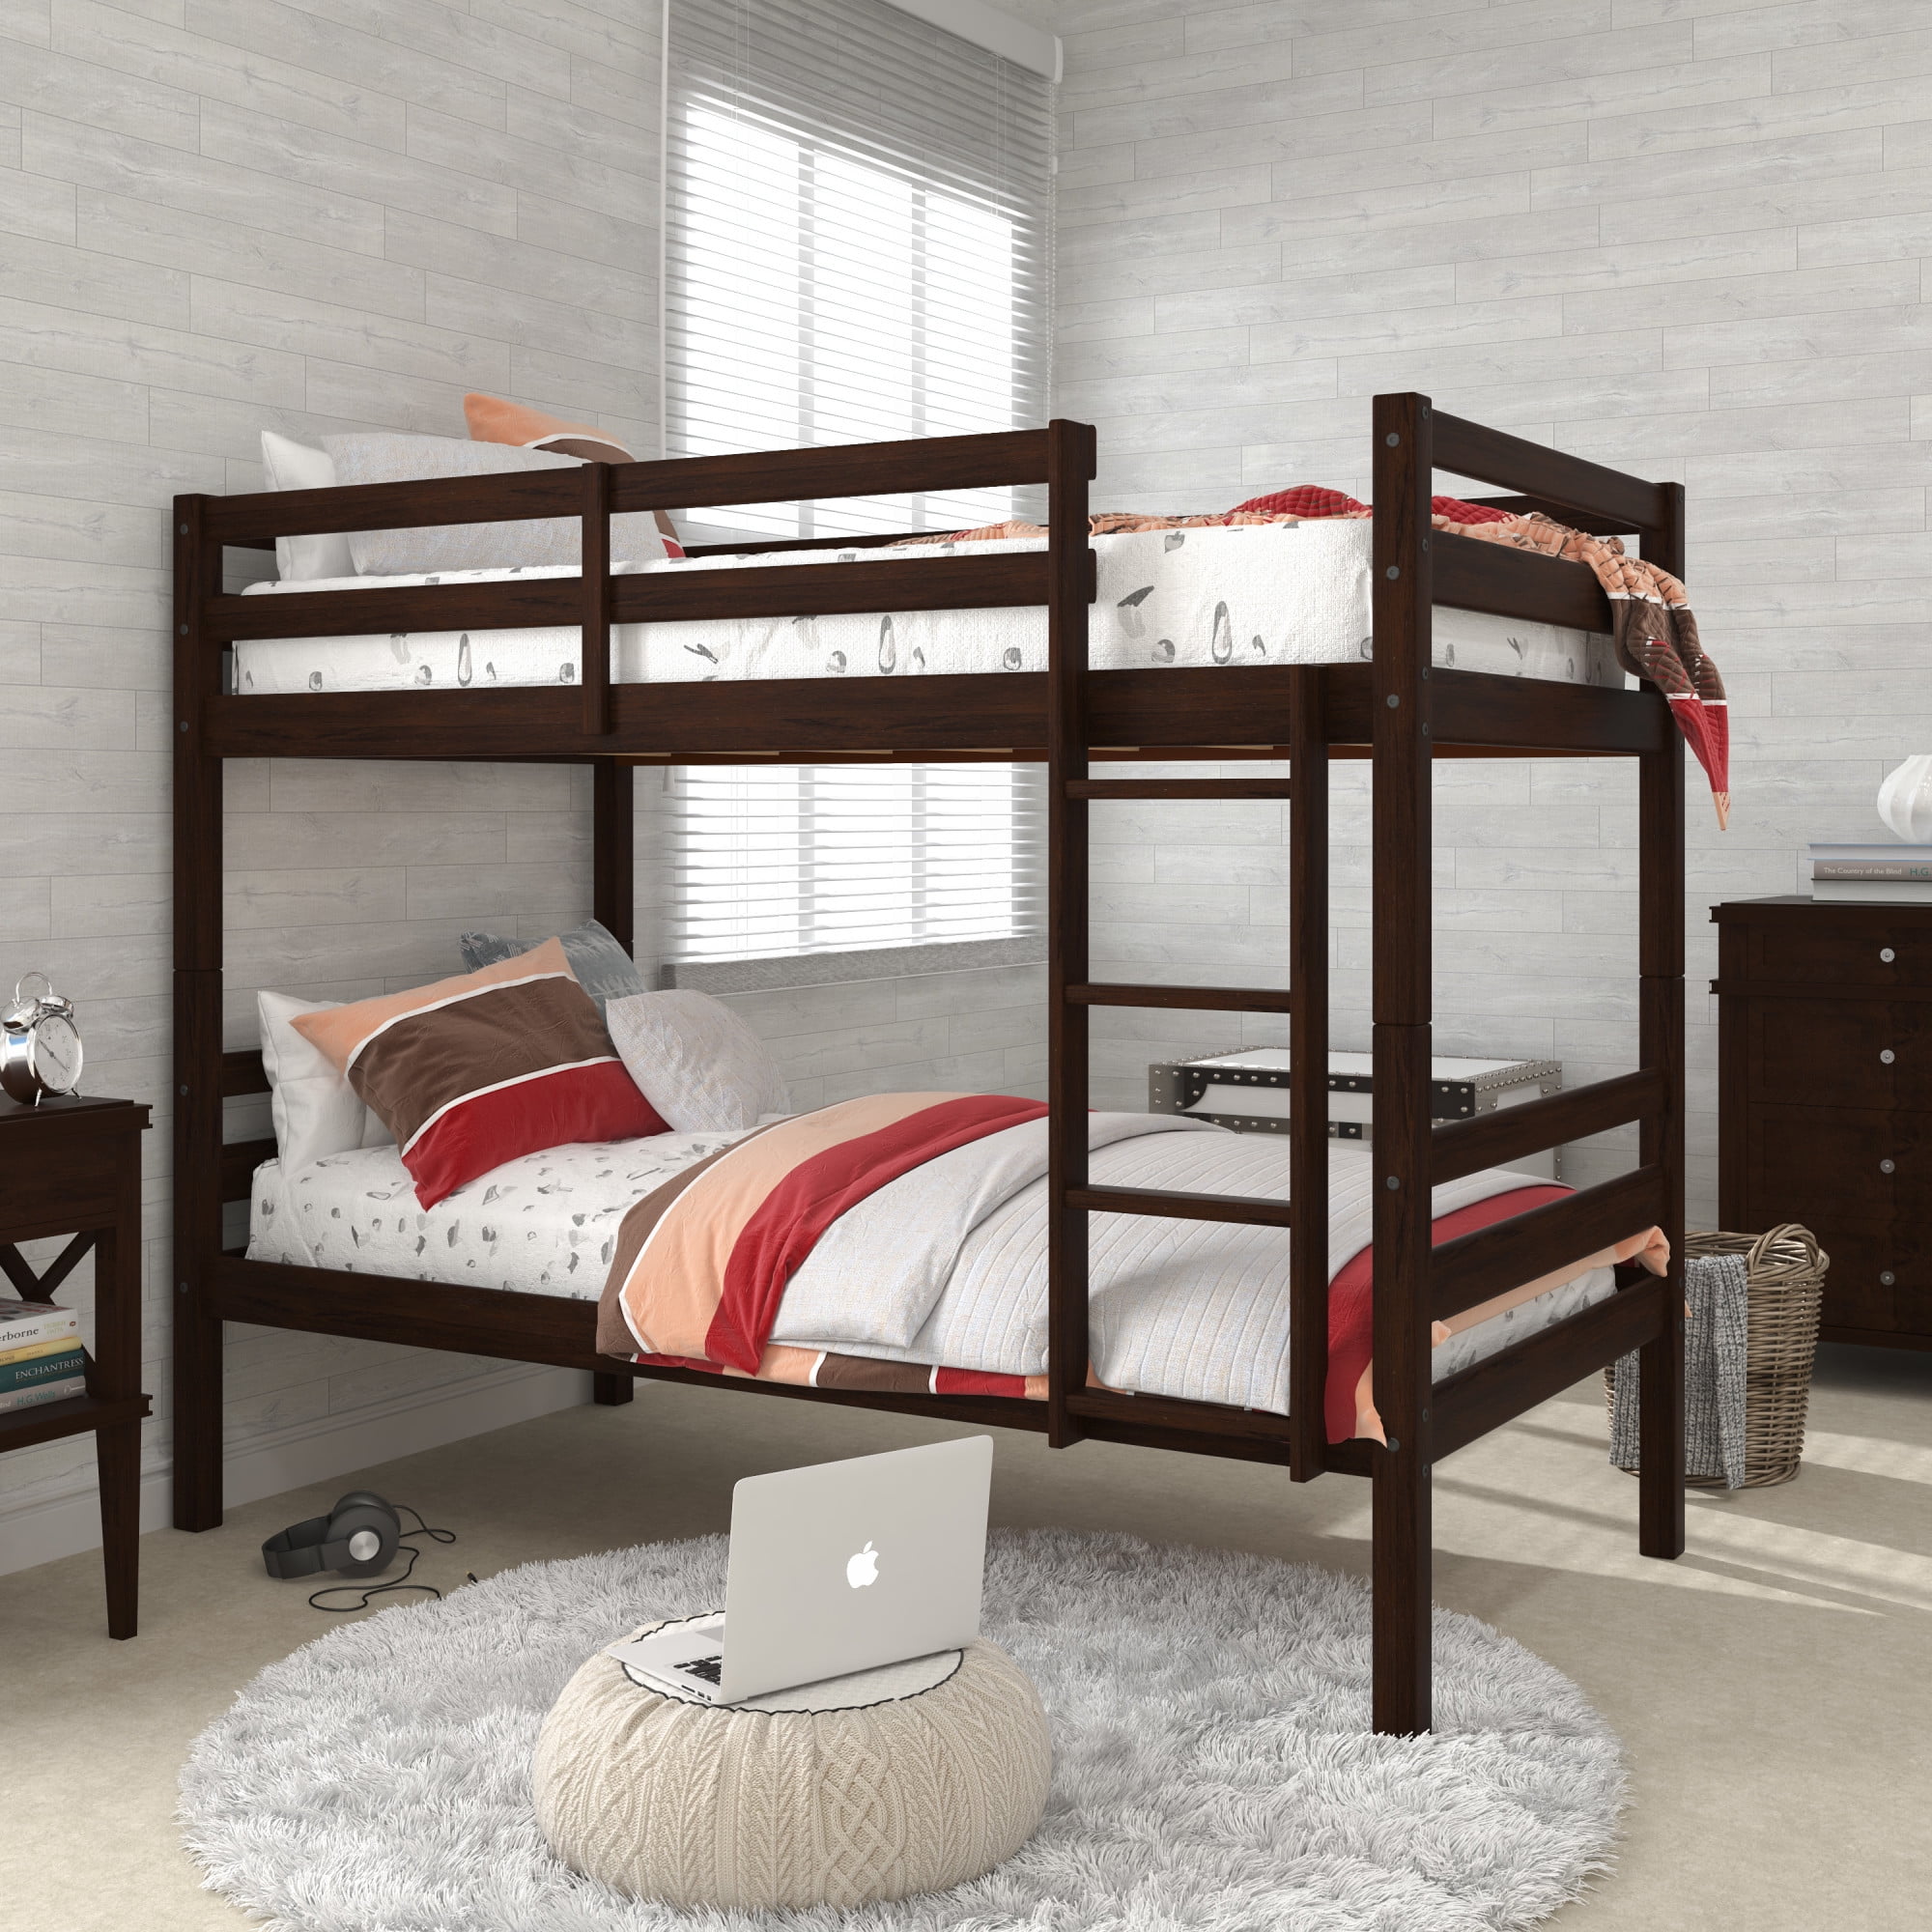 Campbell Wood Twin Over Bunk Bed, Twin Over Bunk Bed With Stairs Assembly Instructions